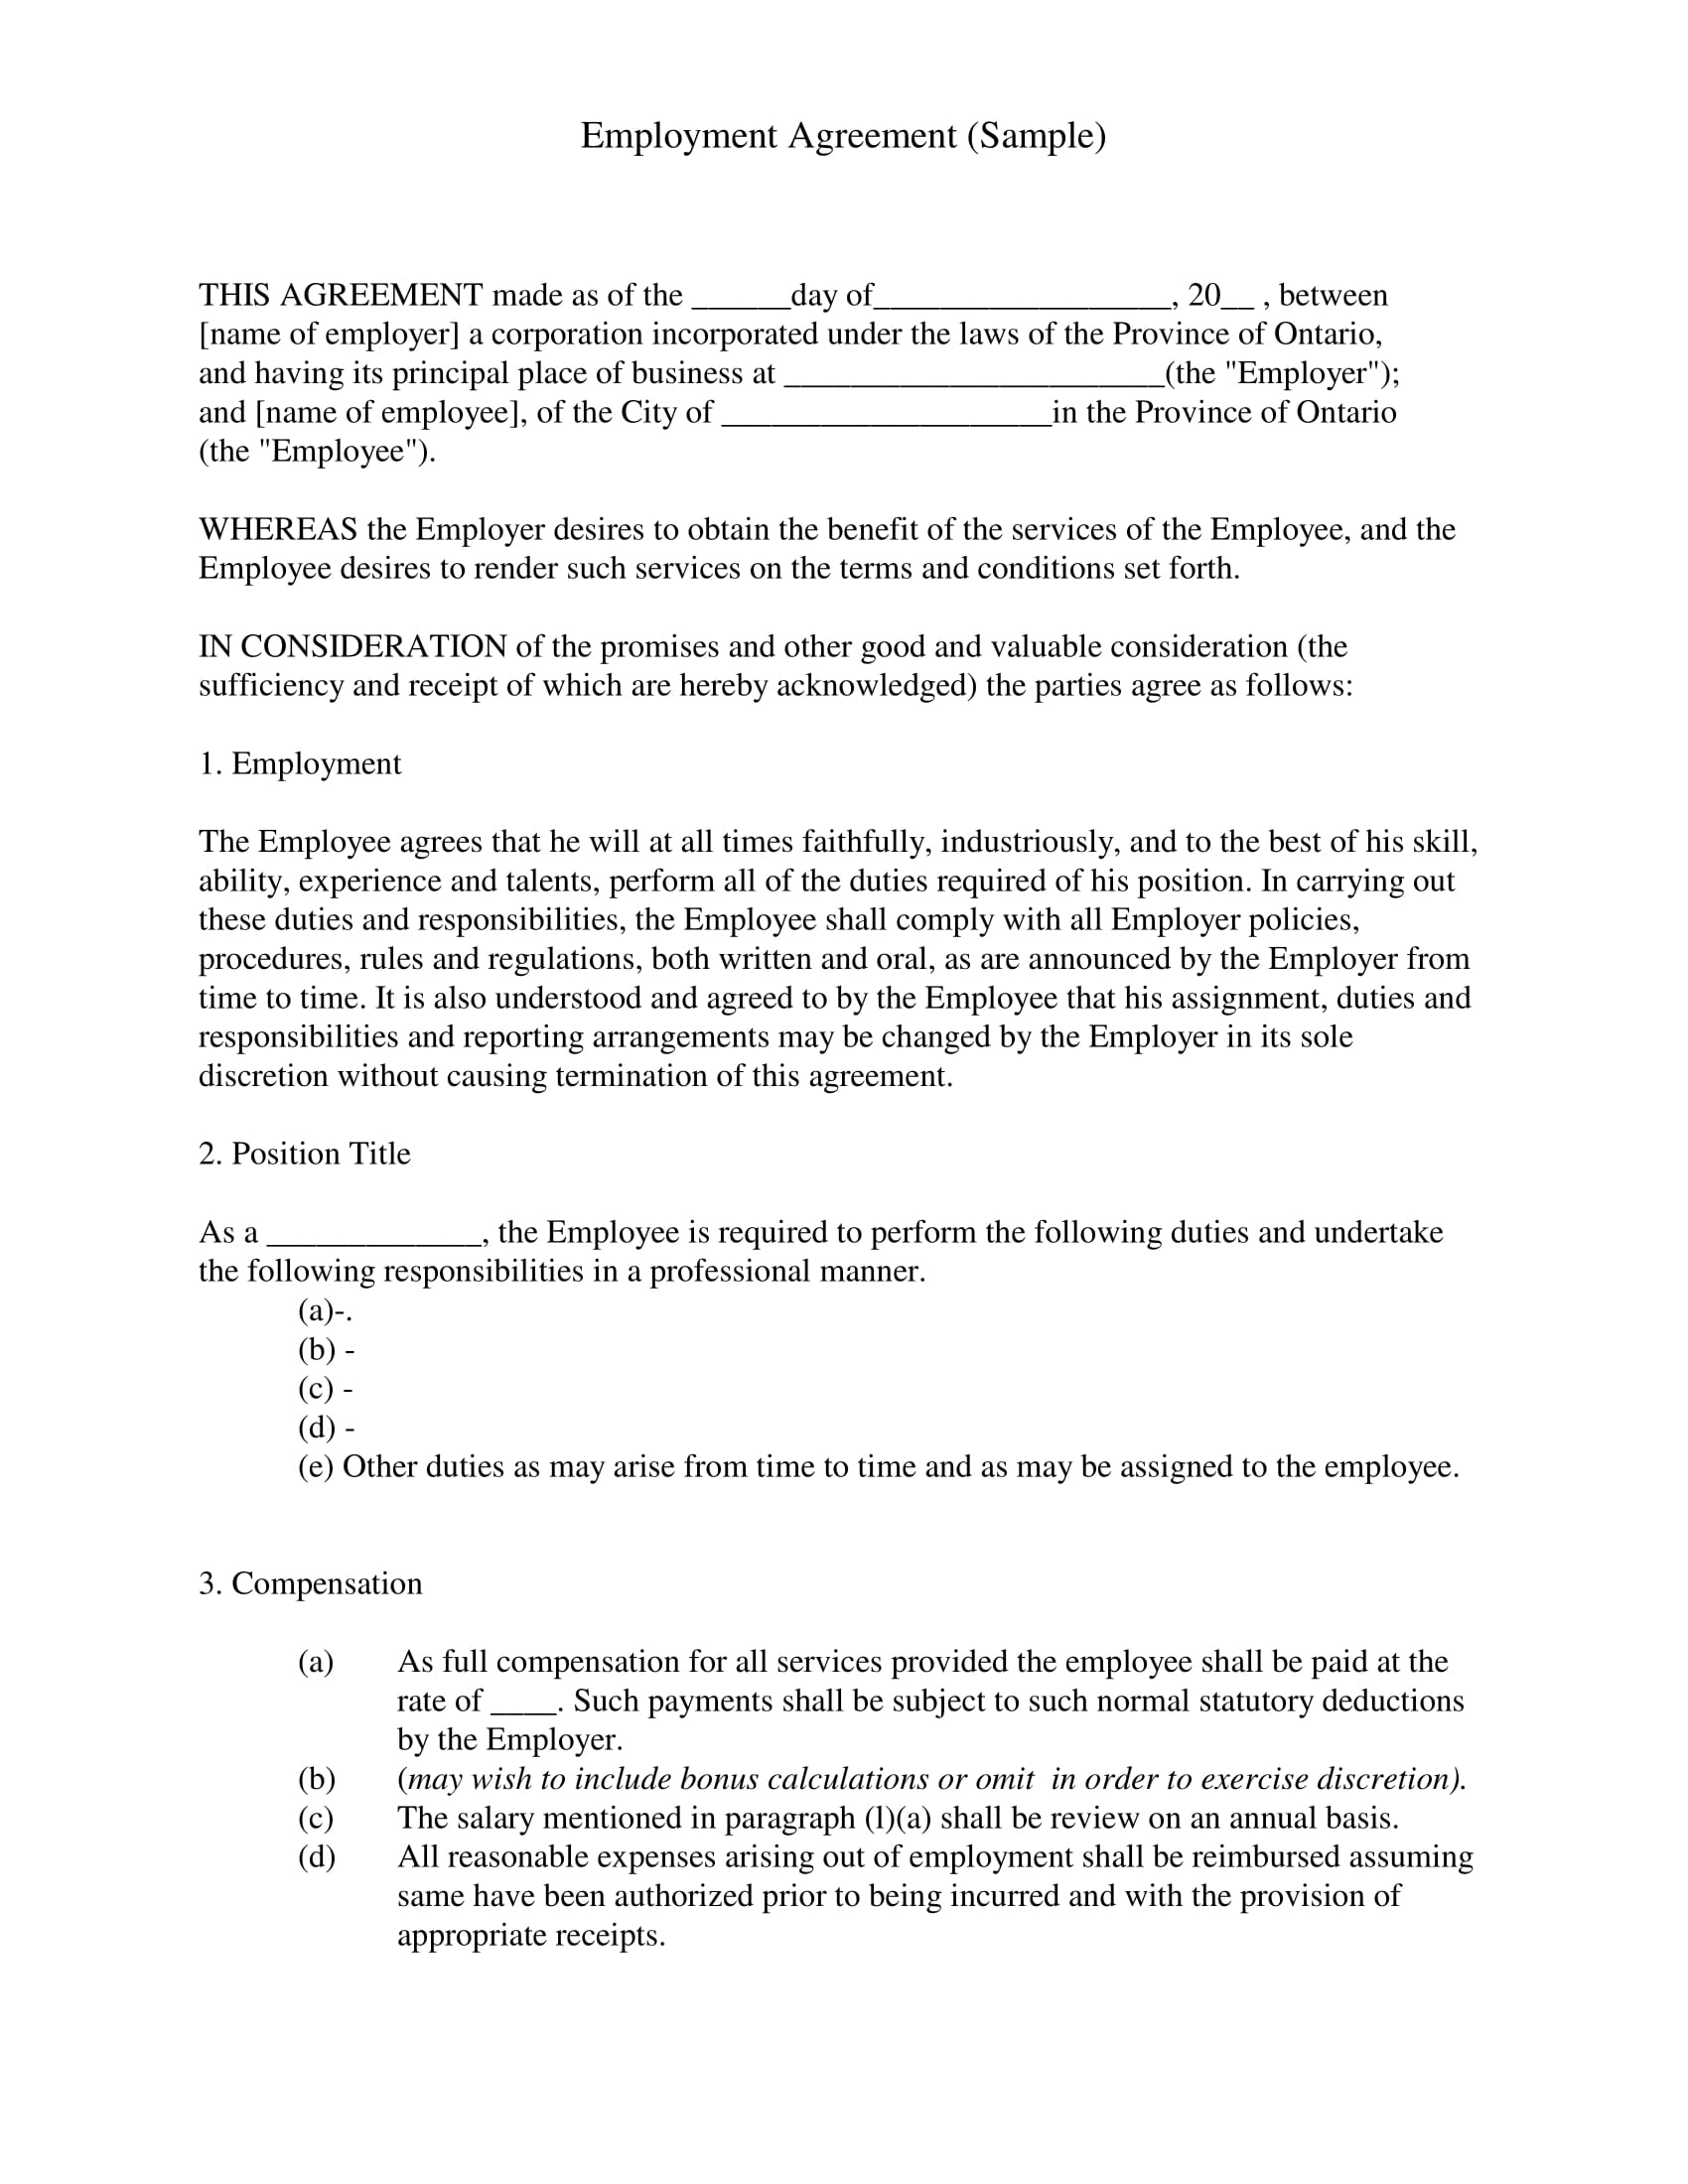 detailed employment agreement example